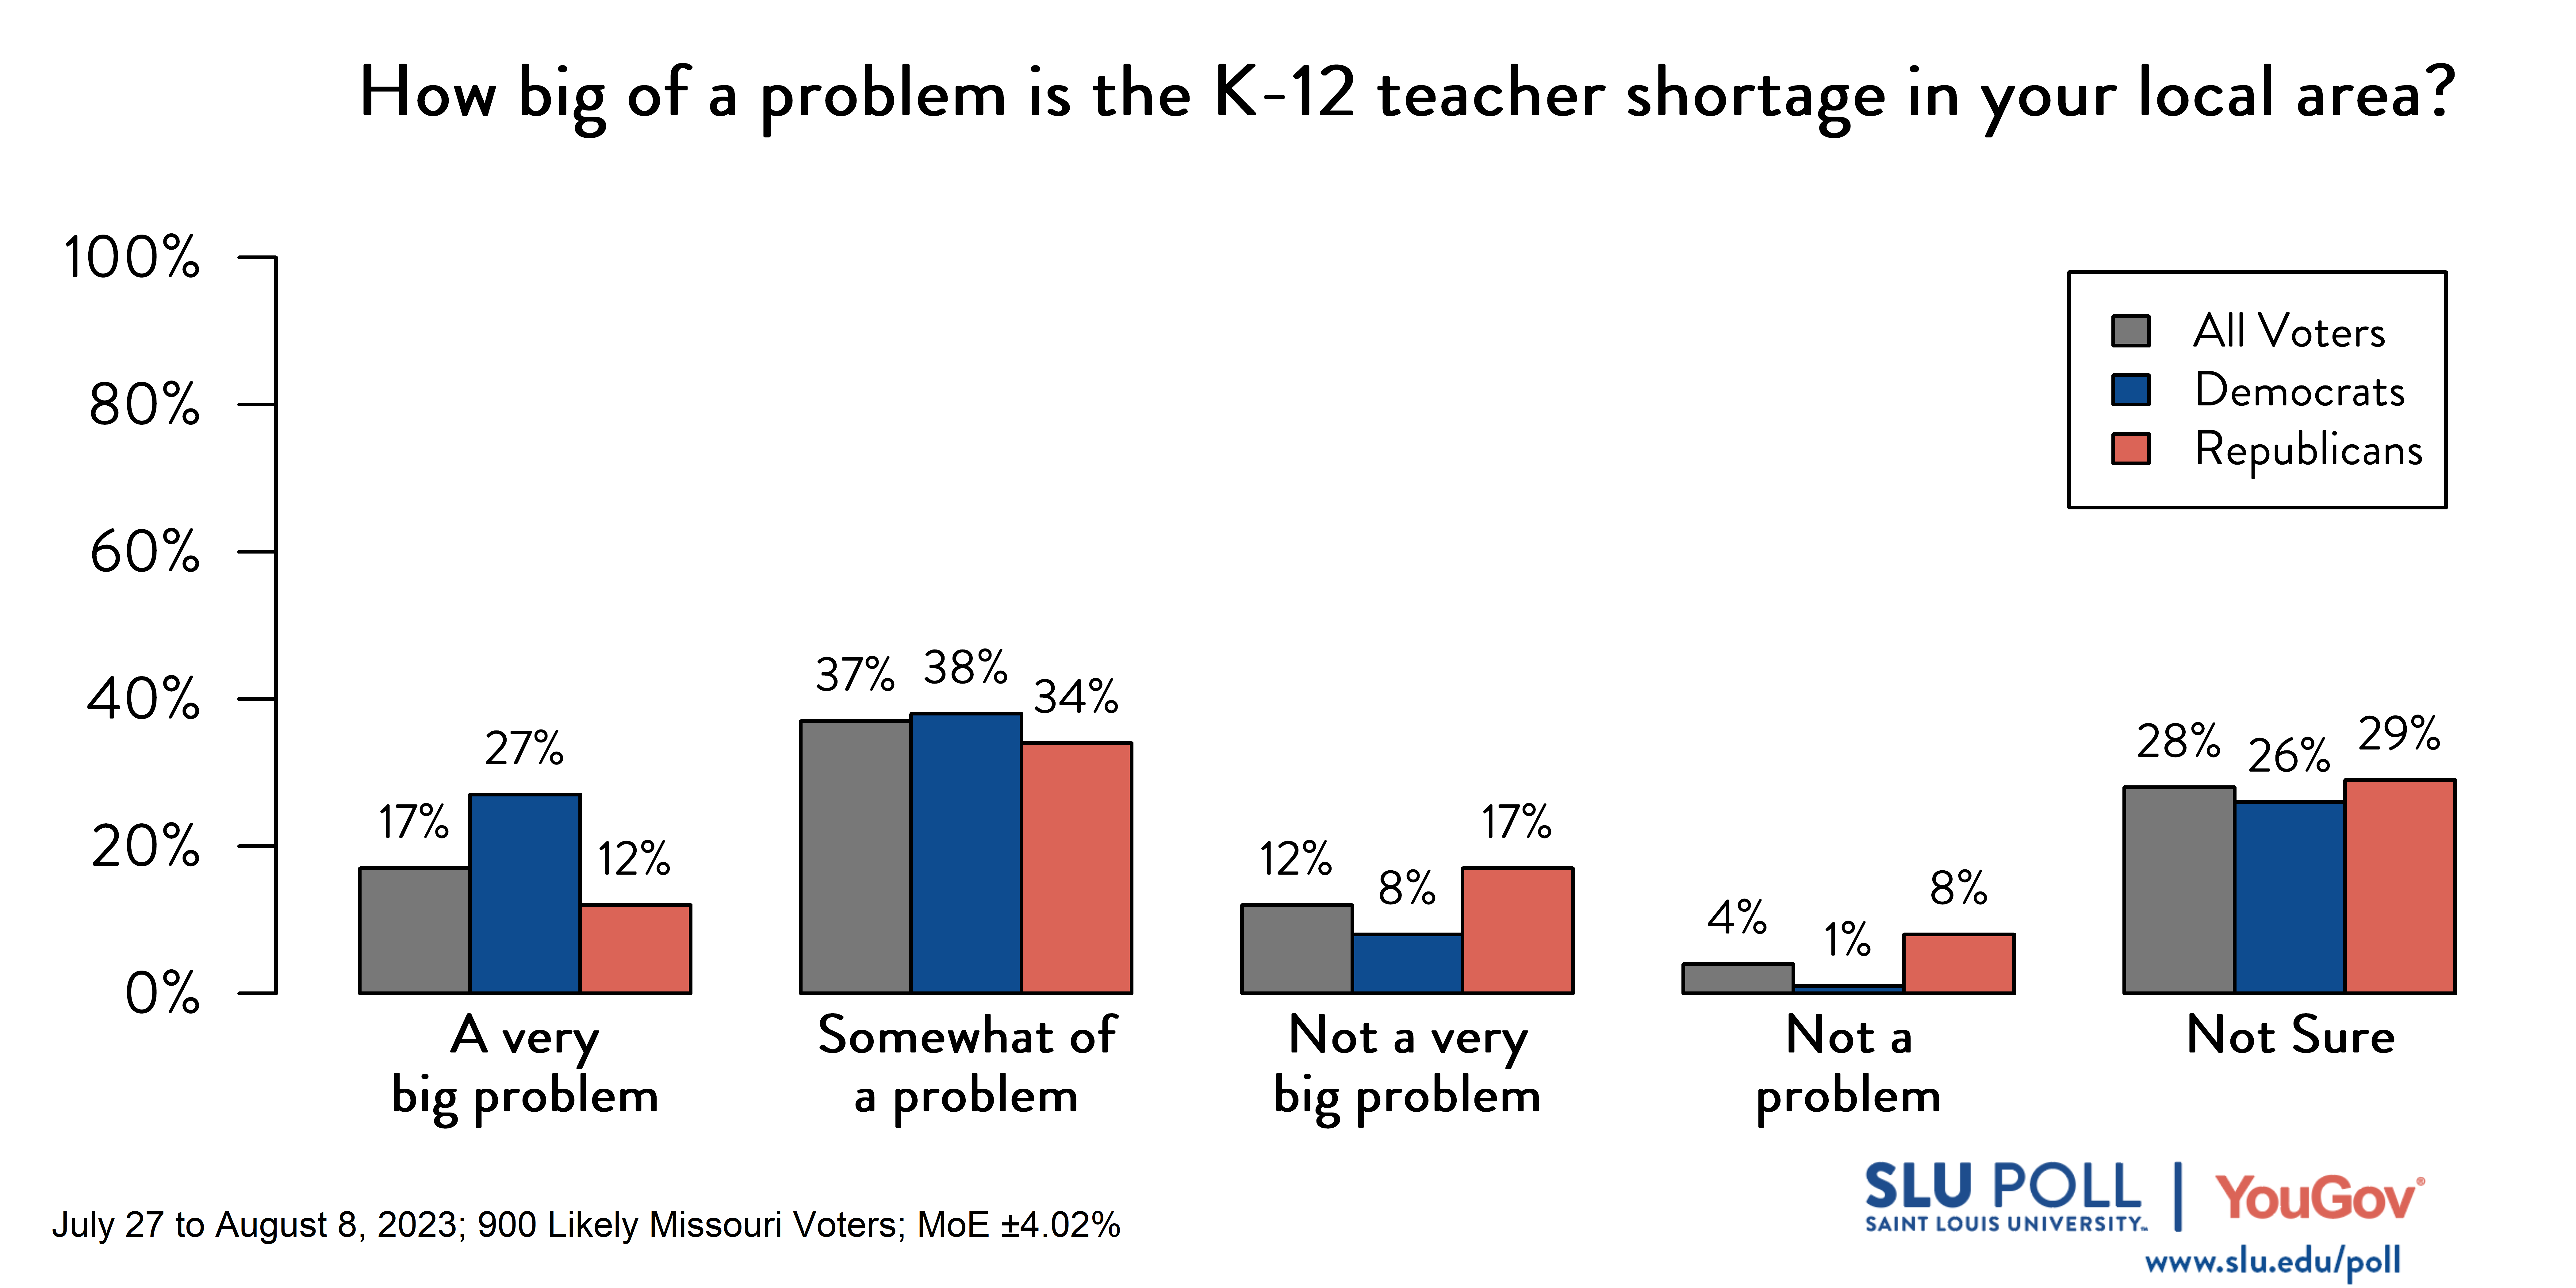 Likely voters' responses to 'How big of a problem is the K-12 teacher shortage in your local area?': 17% A very big problem, 37% Somewhat of a problem, 12% Not a very big problem, 4% Not a problem, and 28% Not sure. Democratic voters' responses: ' 27% A very big problem, 38% Somewhat of a problem, 8% Not a very big problem, 1% Not a problem, and 26% Not sure. Republican voters' responses: 12% A very big problem, 34% Somewhat of a problem, 17% Not a very big problem, 8% Not a problem, and 29% Not sure.